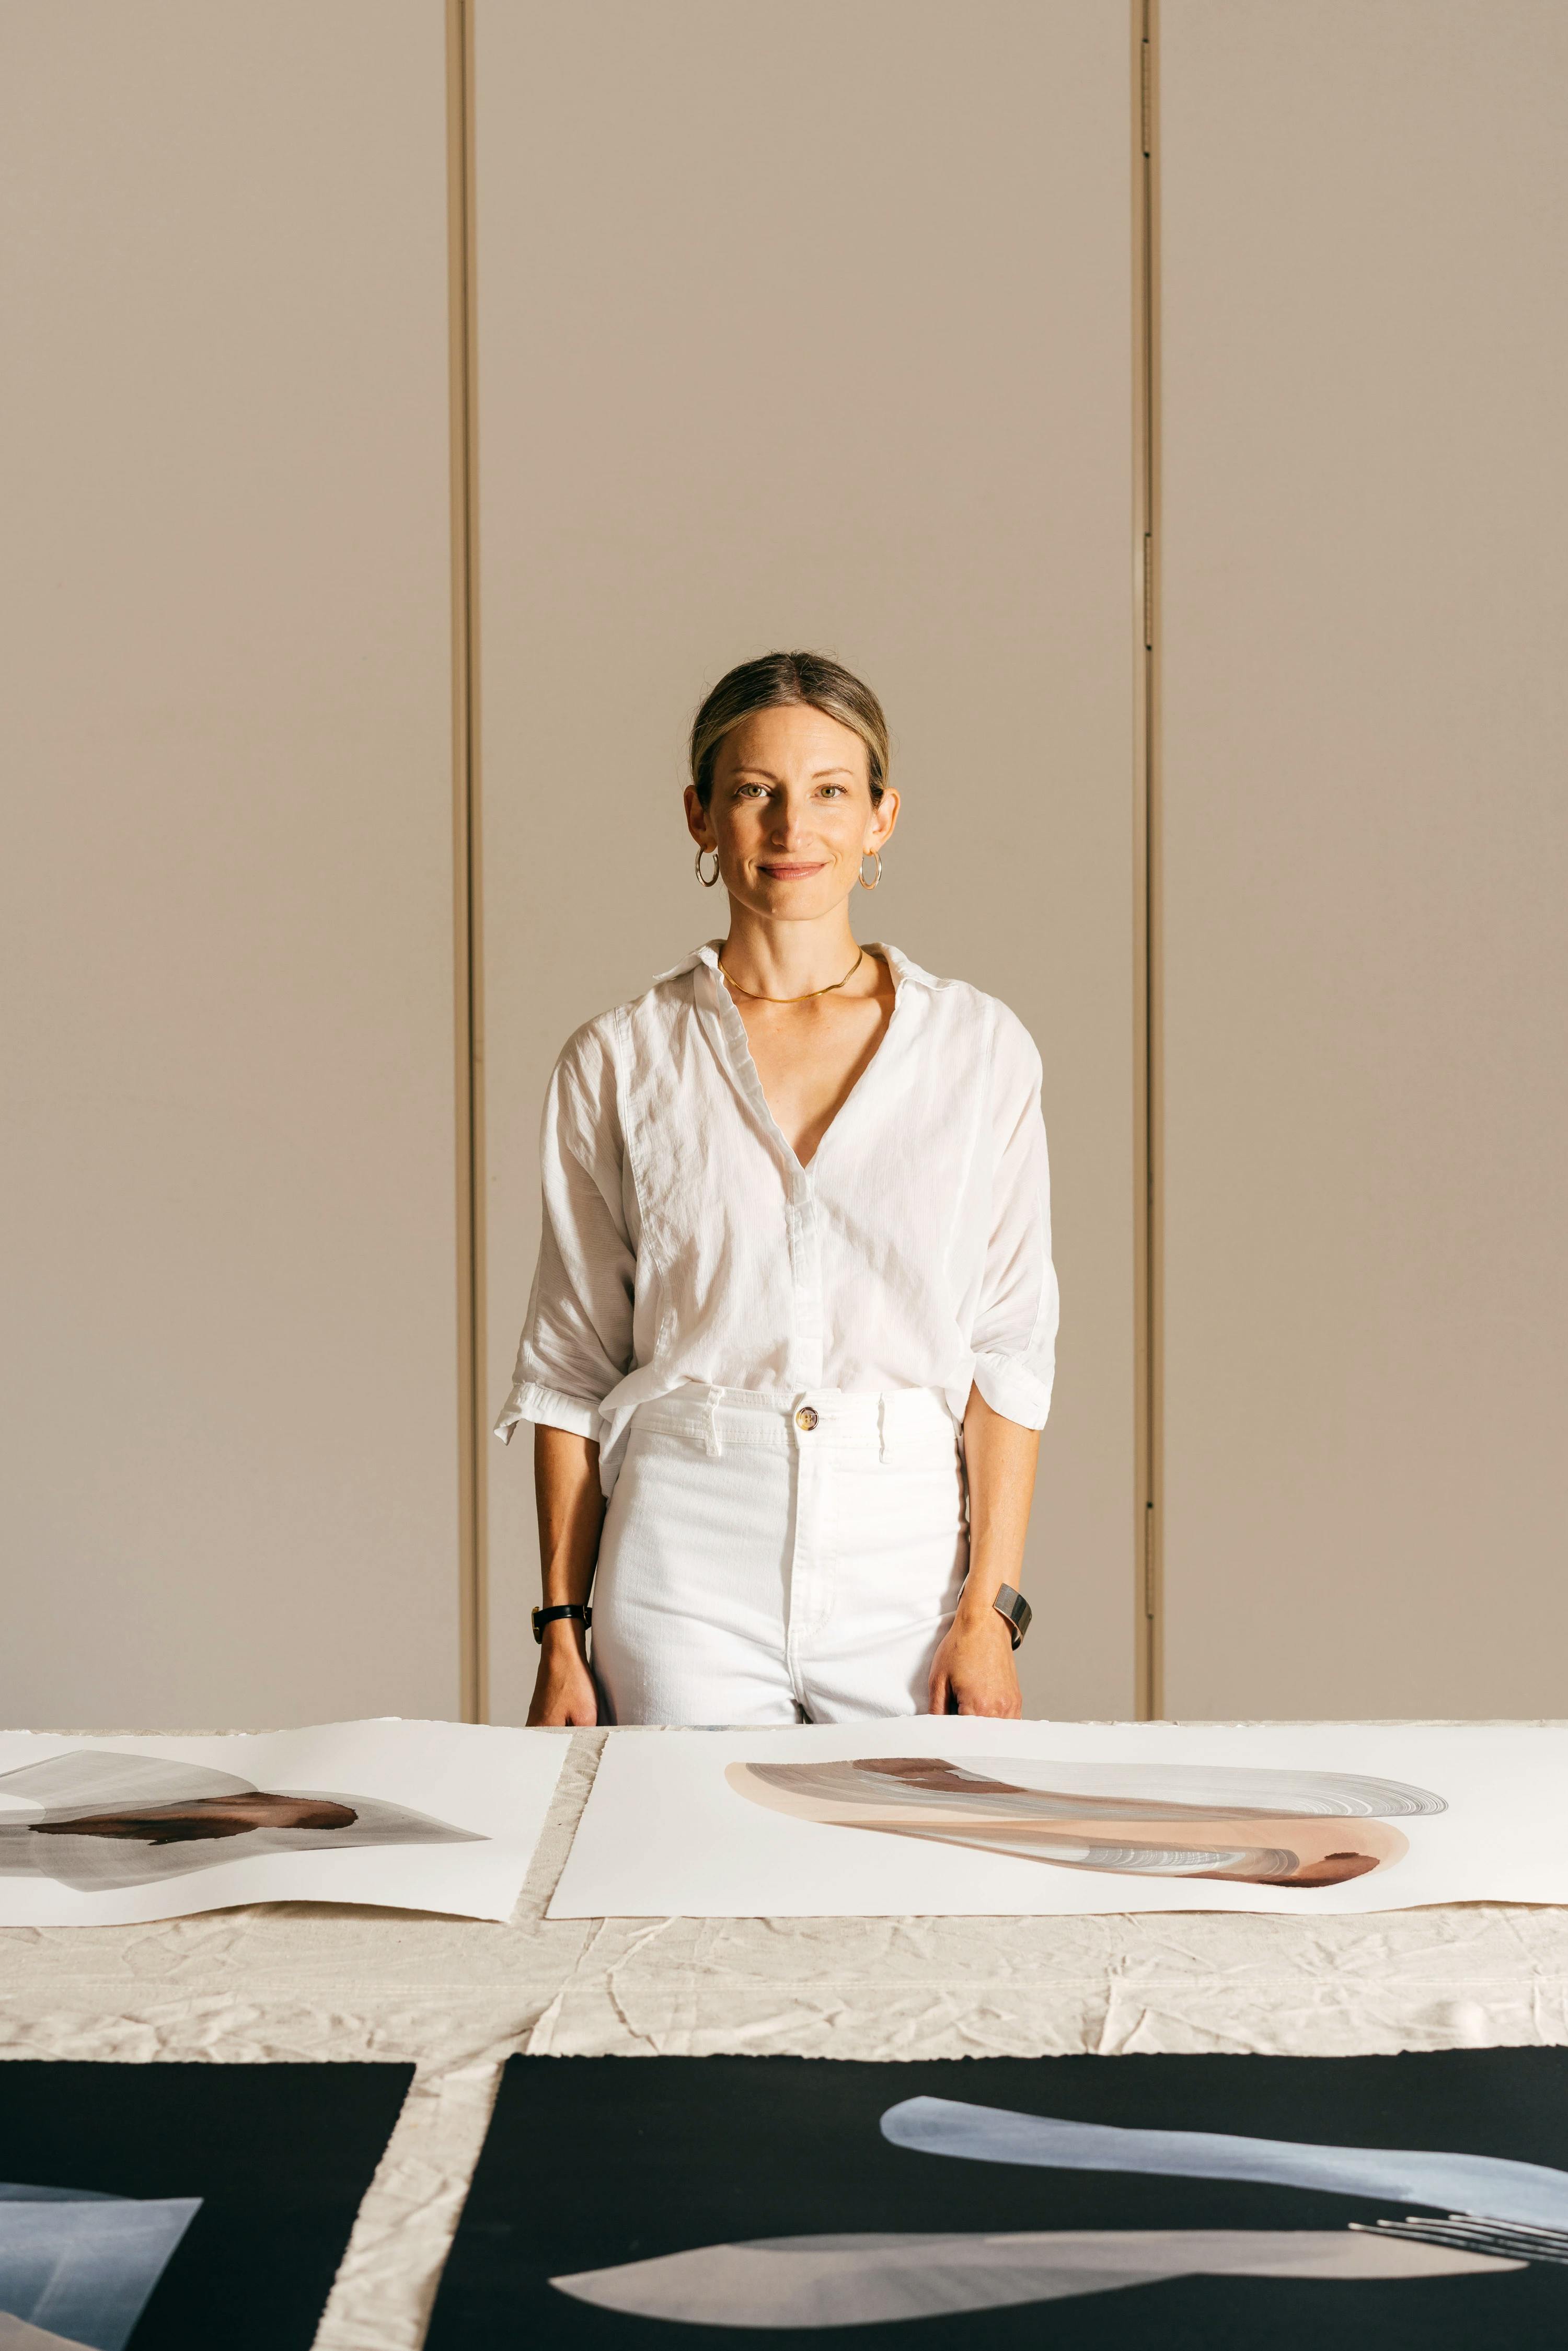 Artist Laura Naples stands behind large paintings on paper spread across a table at MacArthur Place.